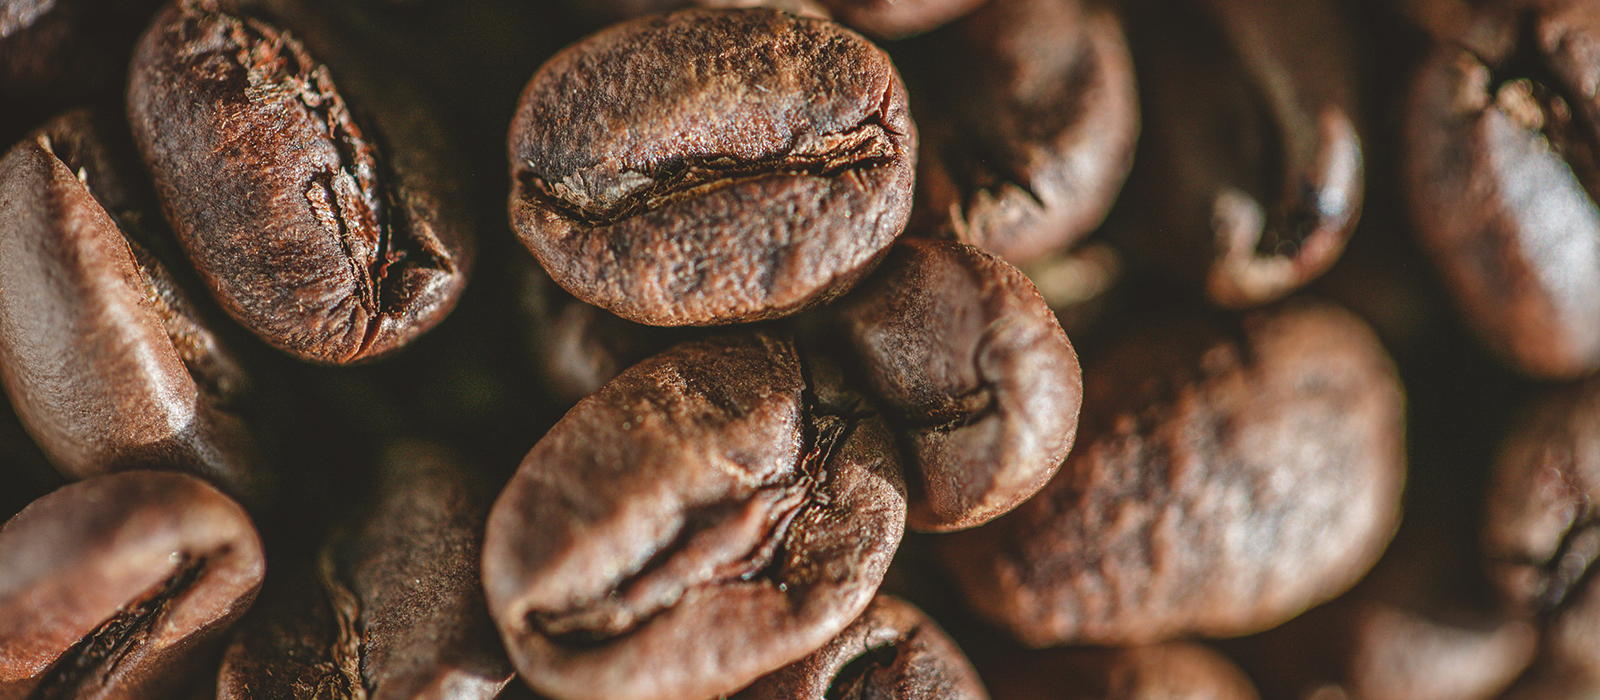 Coffee beans : Everything you need to know